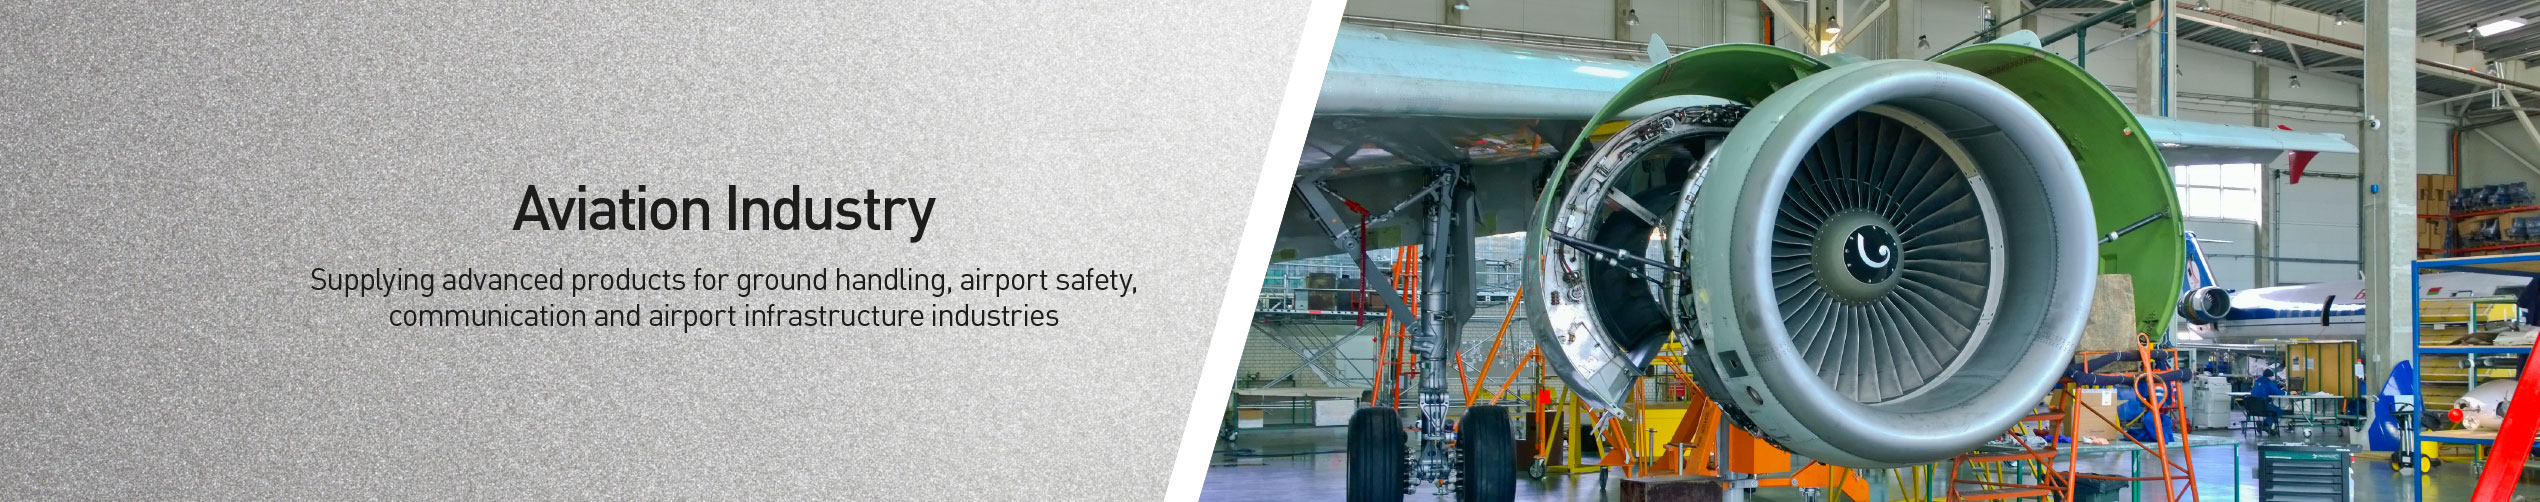 application of ndt in aviation industry